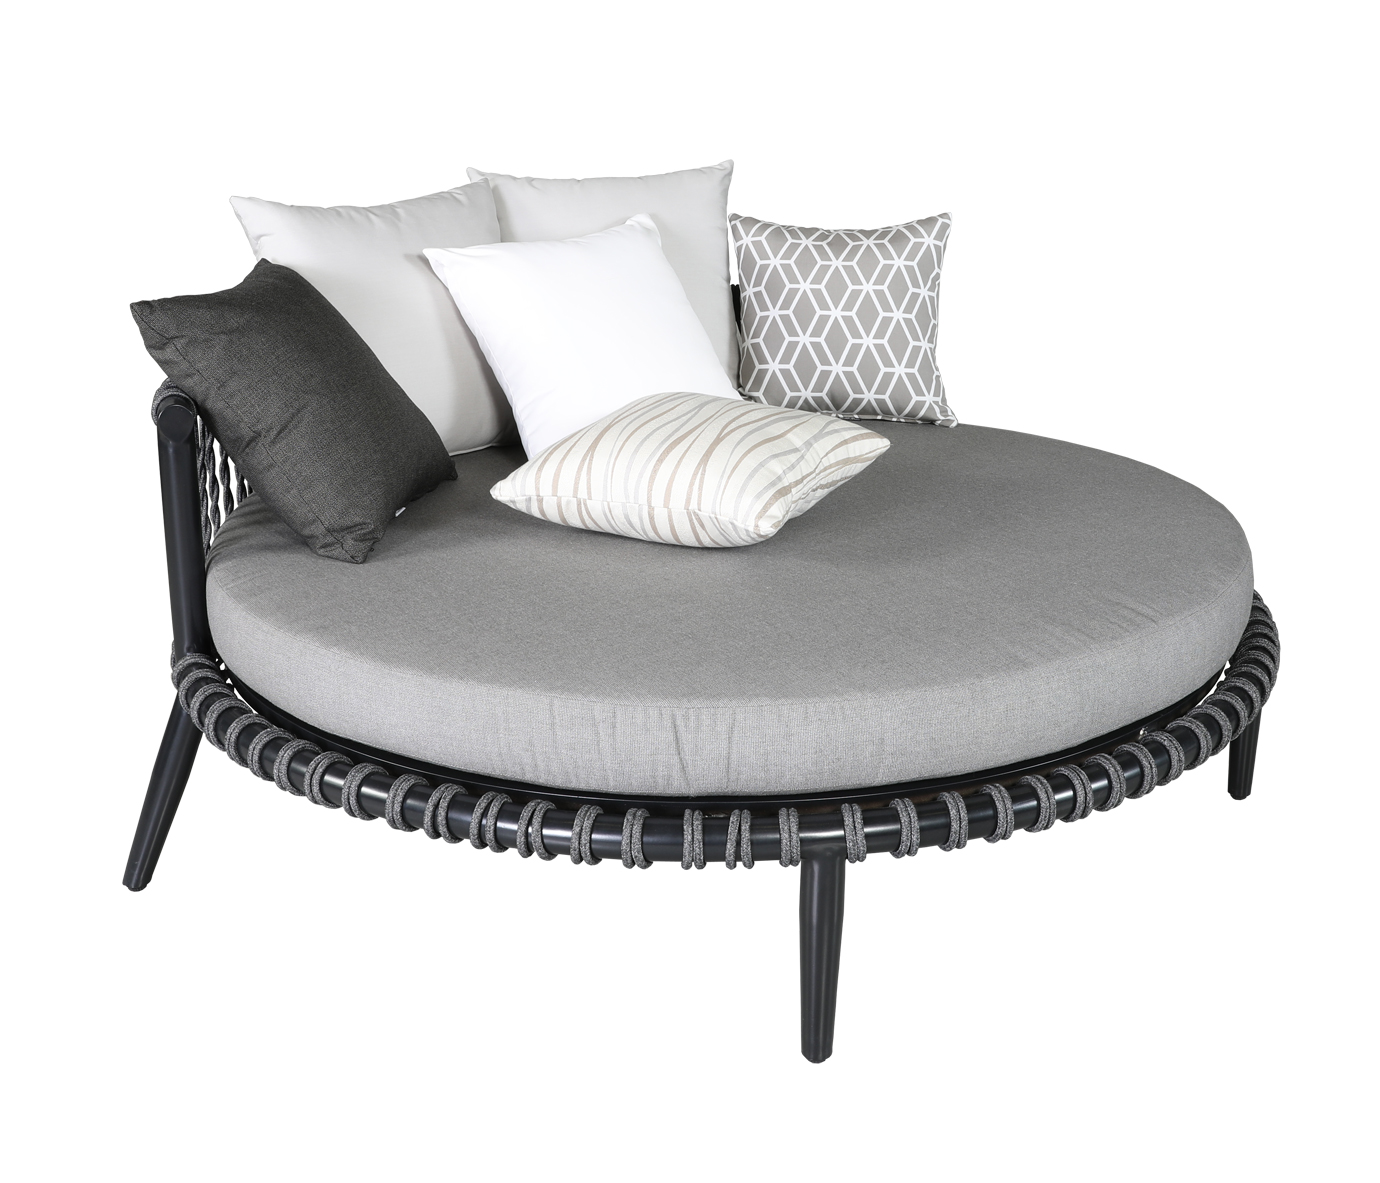 Tate-Outdoor-Daybed-S